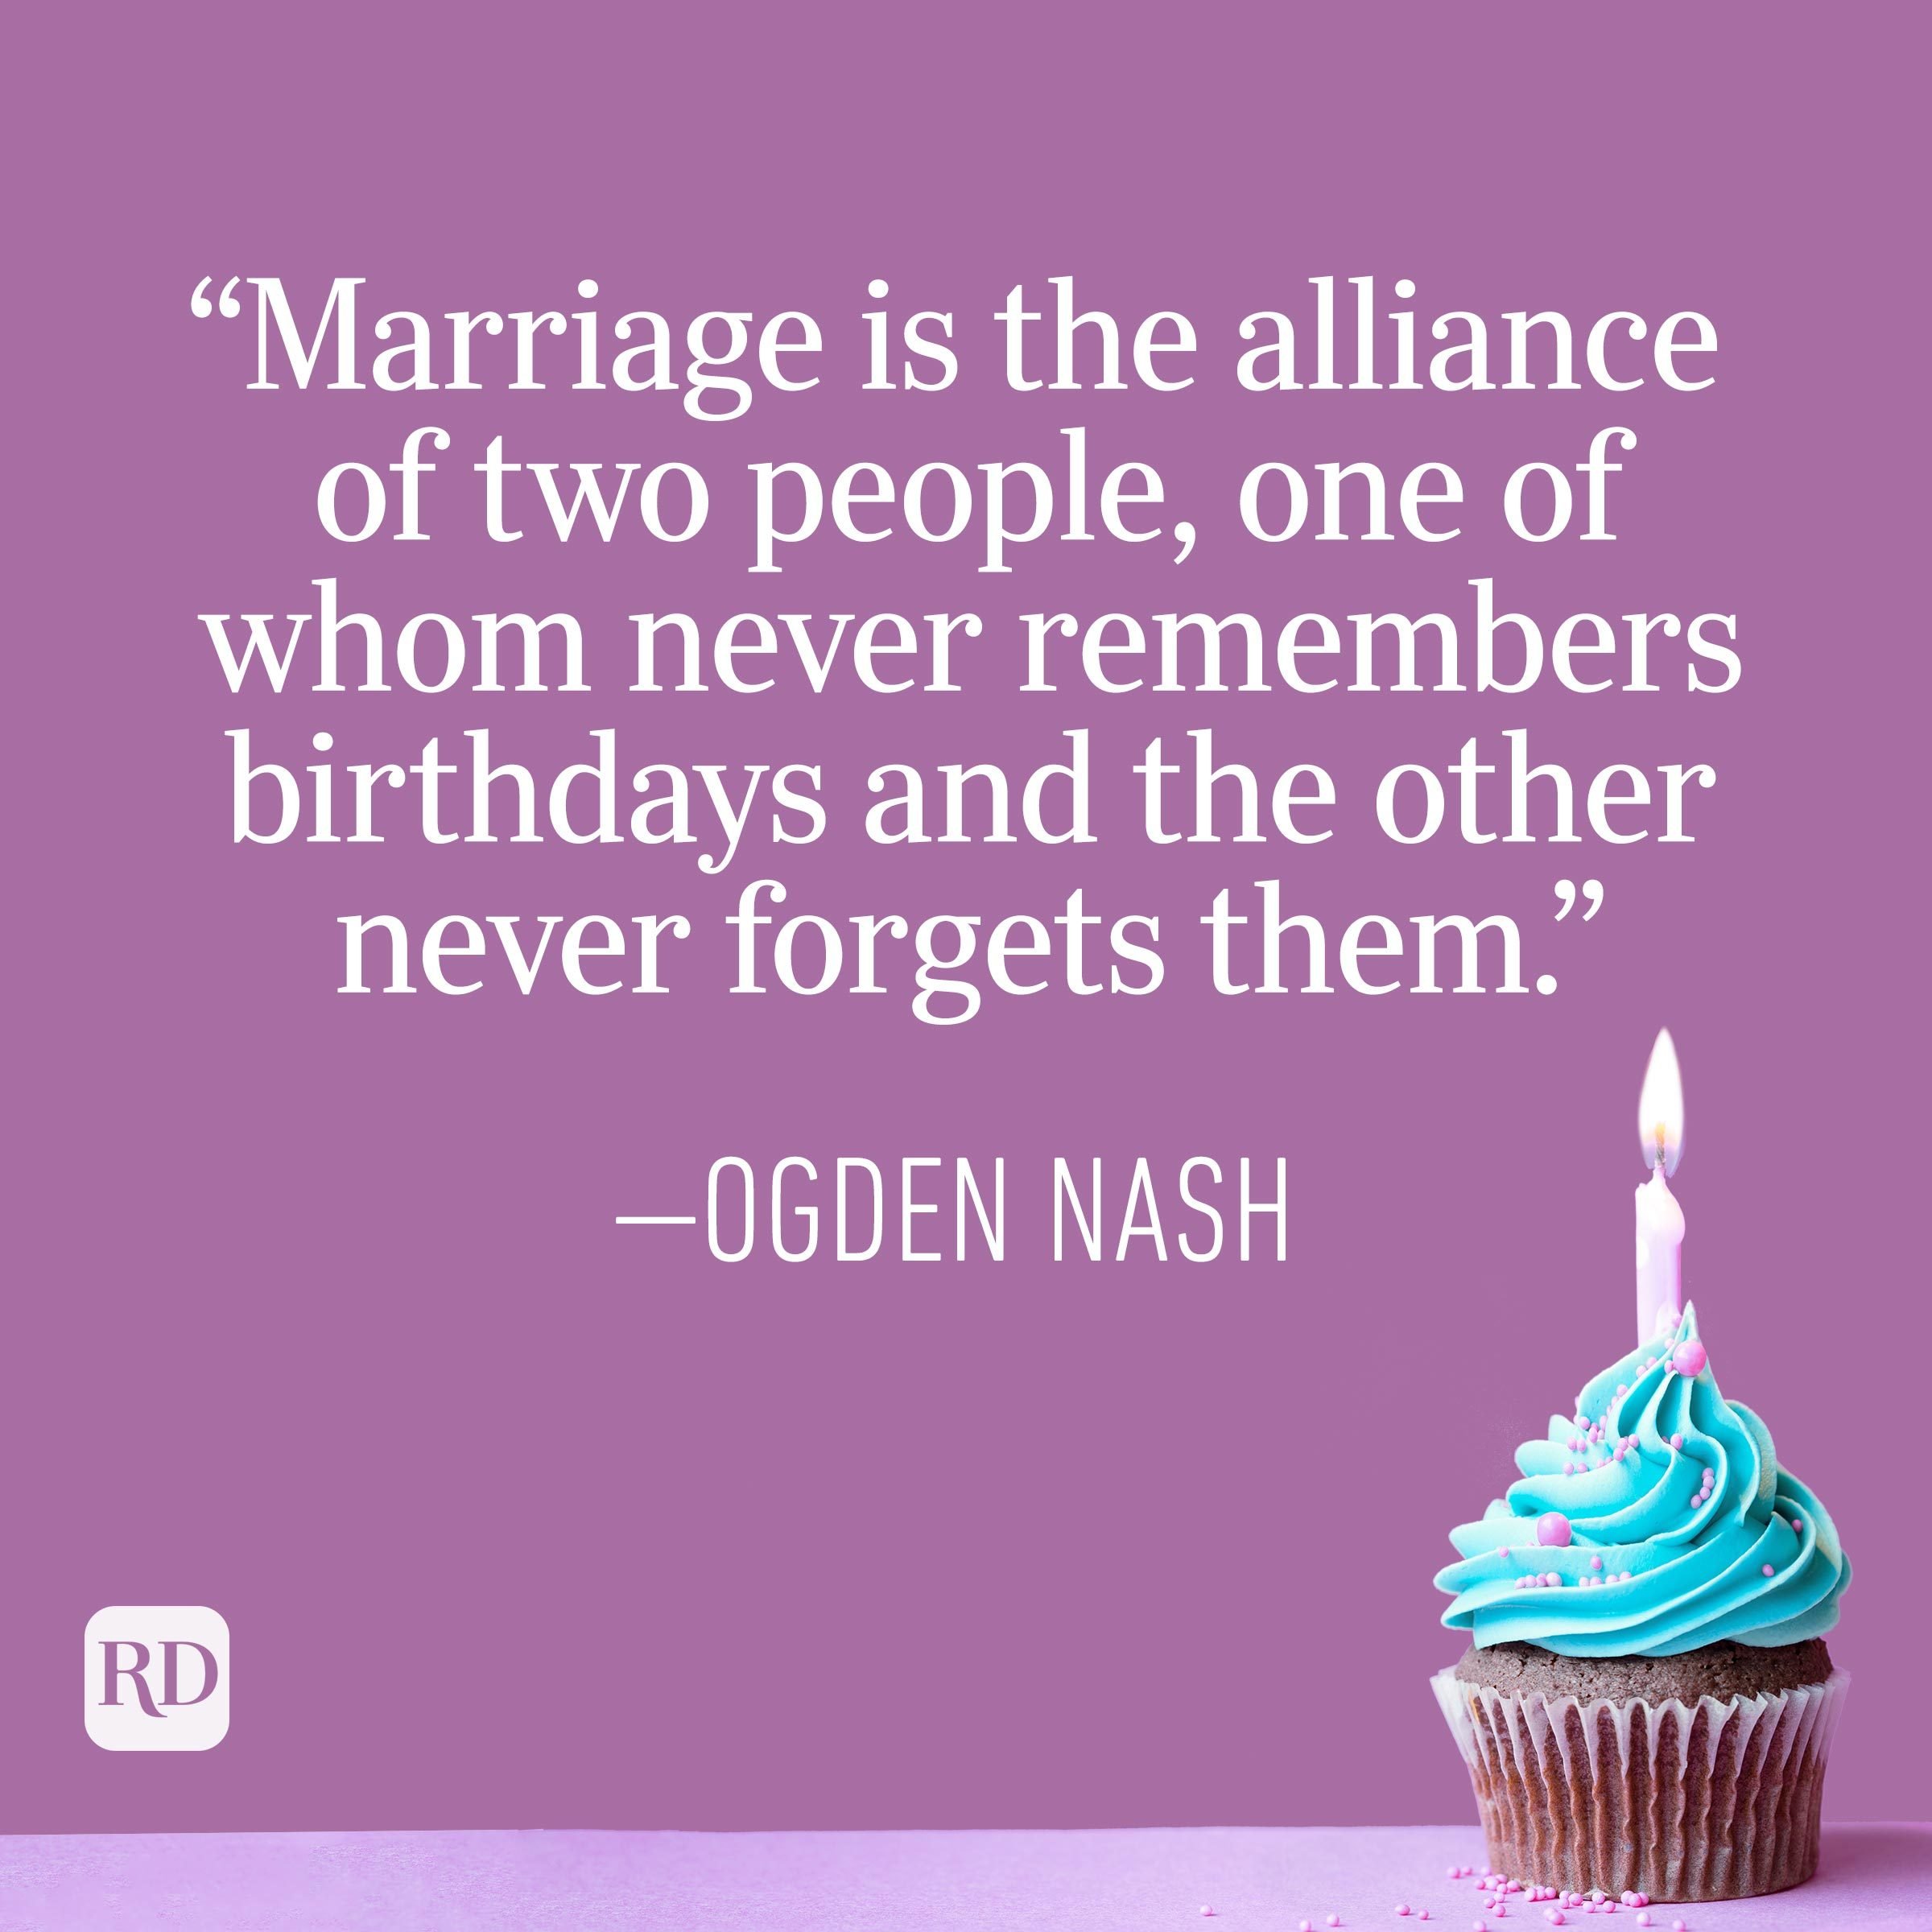 "Marriage is the alliance of two people, one of whom never remembers birthdays and the other never forgets them." — Ogden Nash